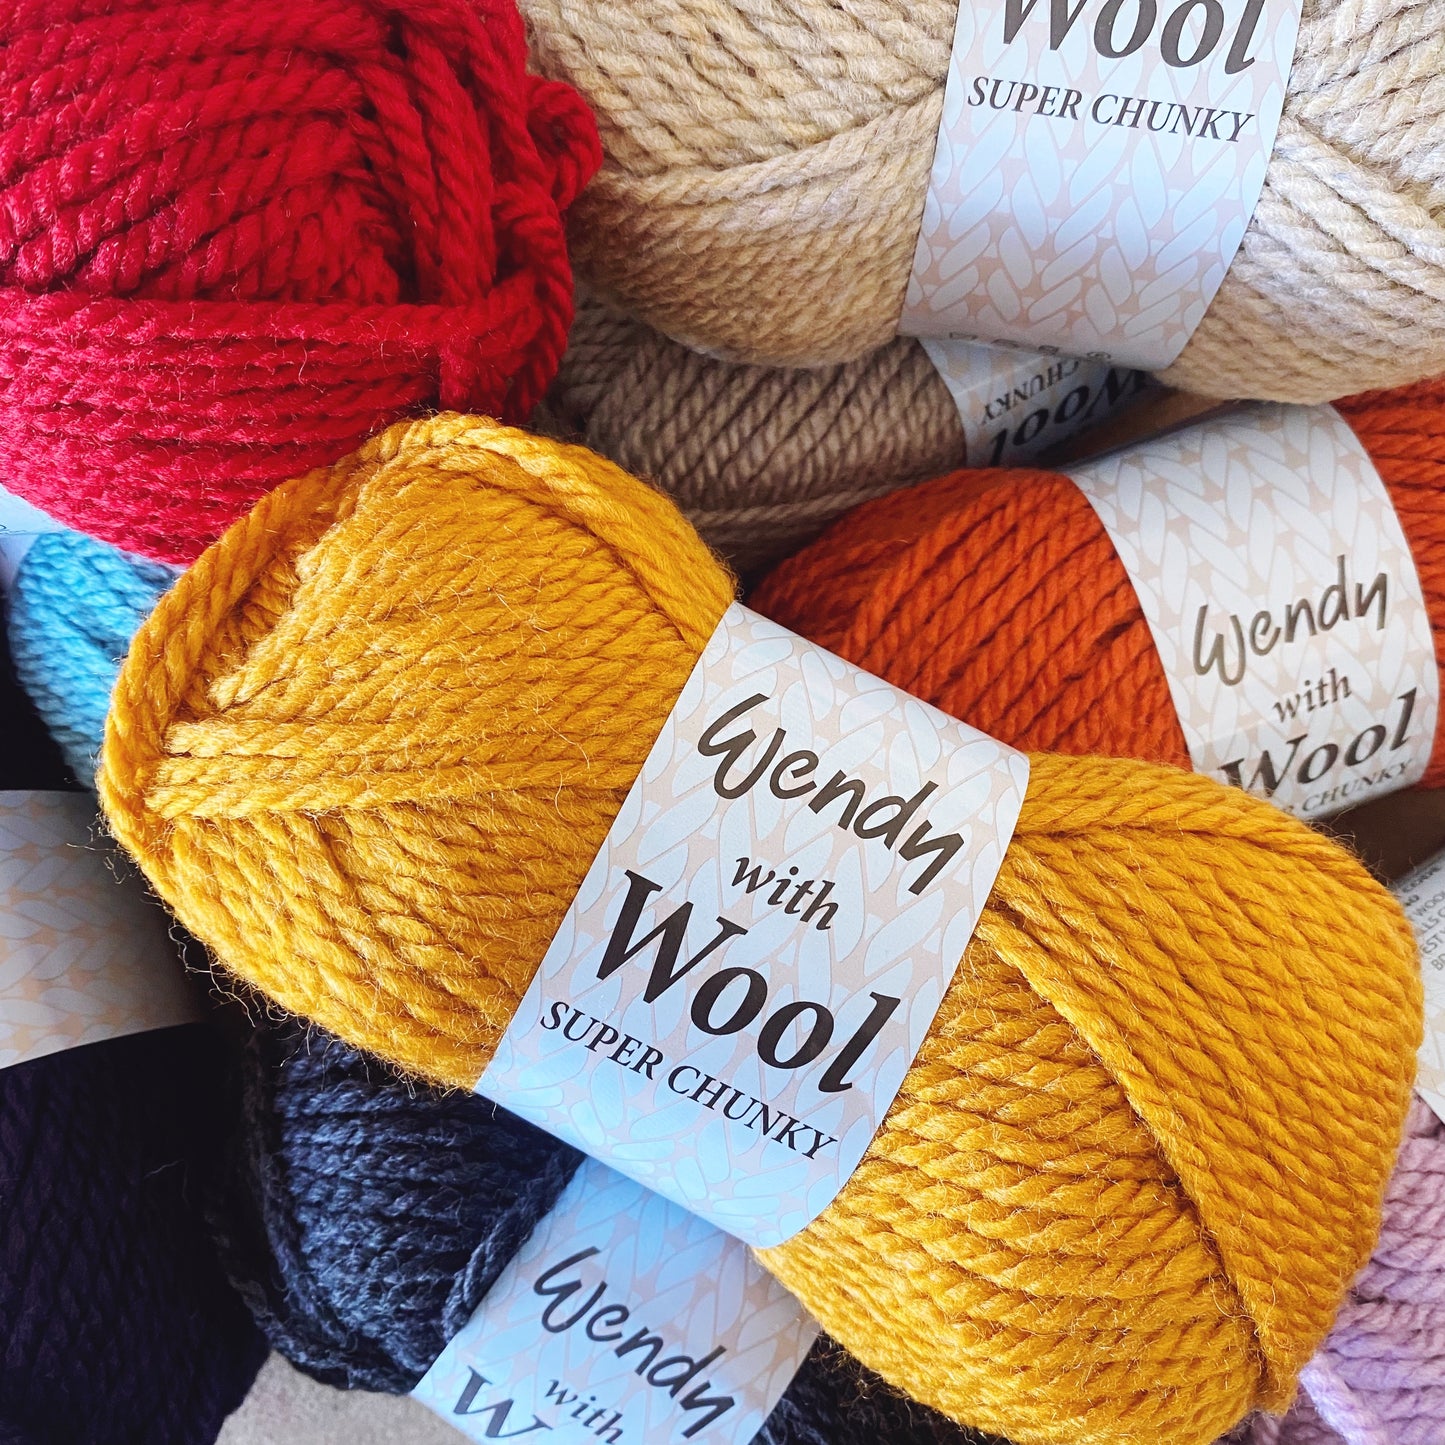 Wendy Wools - with Wool Super Chunky